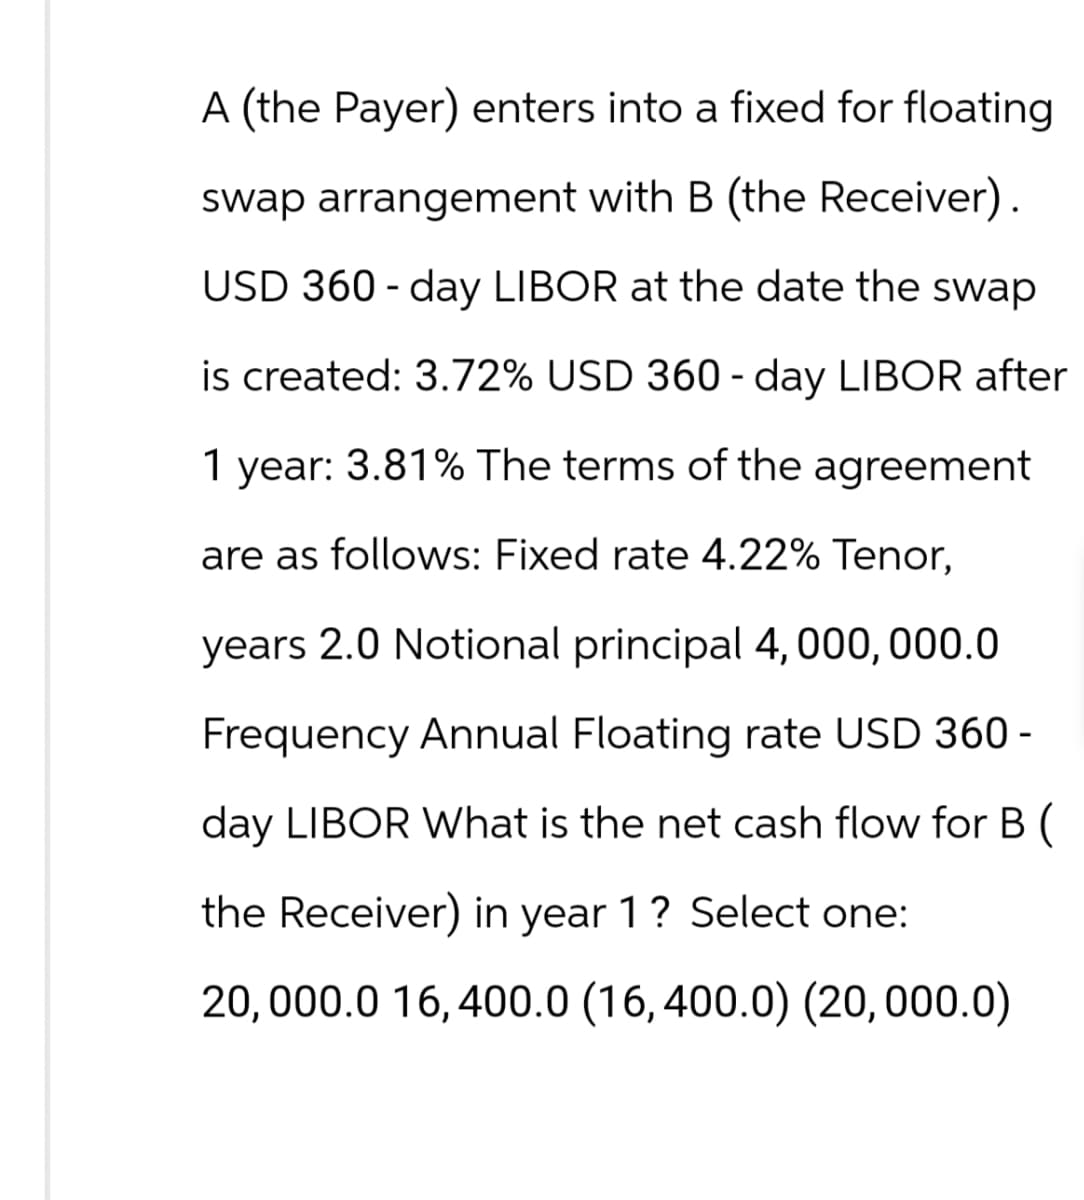 A (the Payer) enters into a fixed for floating
swap arrangement with B (the Receiver).
USD 360-day LIBOR at the date the swap
is created: 3.72% USD 360-day LIBOR after
1 year: 3.81% The terms of the agreement
are as follows: Fixed rate 4.22% Tenor,
years 2.0 Notional principal 4,000,000.0
Frequency Annual Floating rate USD 360 -
day LIBOR What is the net cash flow for B (
the Receiver) in year 1? Select one:
20,000.0 16,400.0 (16,400.0) (20,000.0)